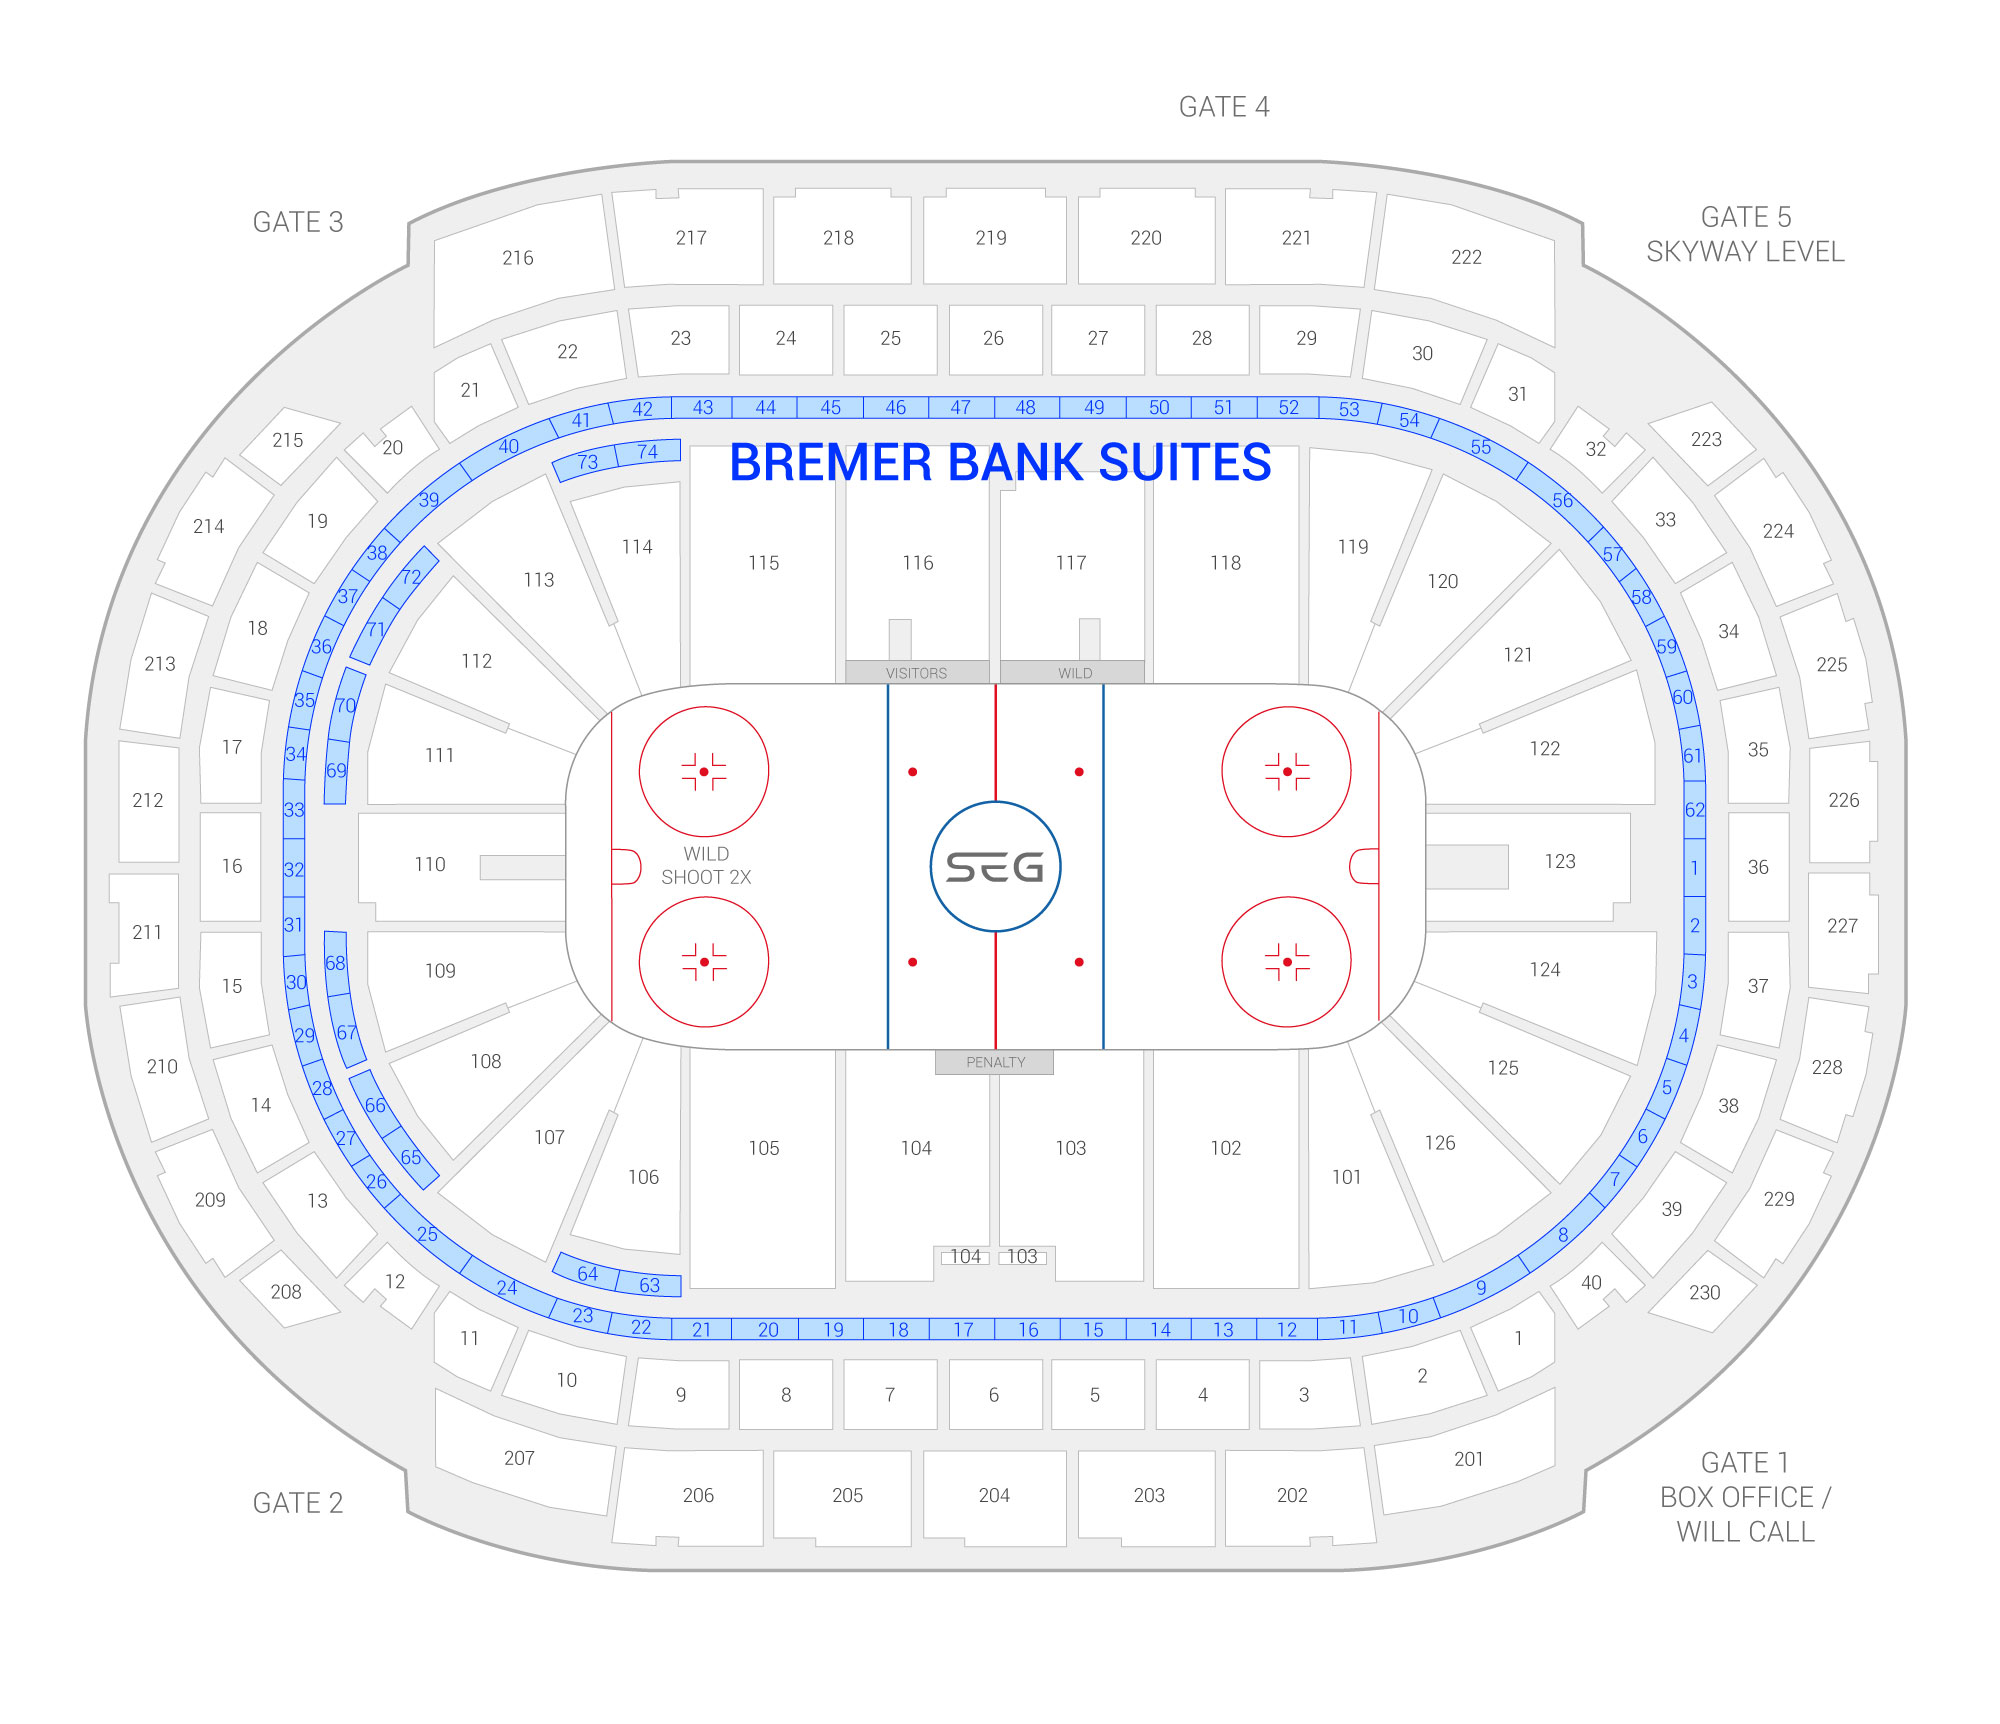 Xcel Energy Center / Minnesota Wild Suite Map and Seating Chart